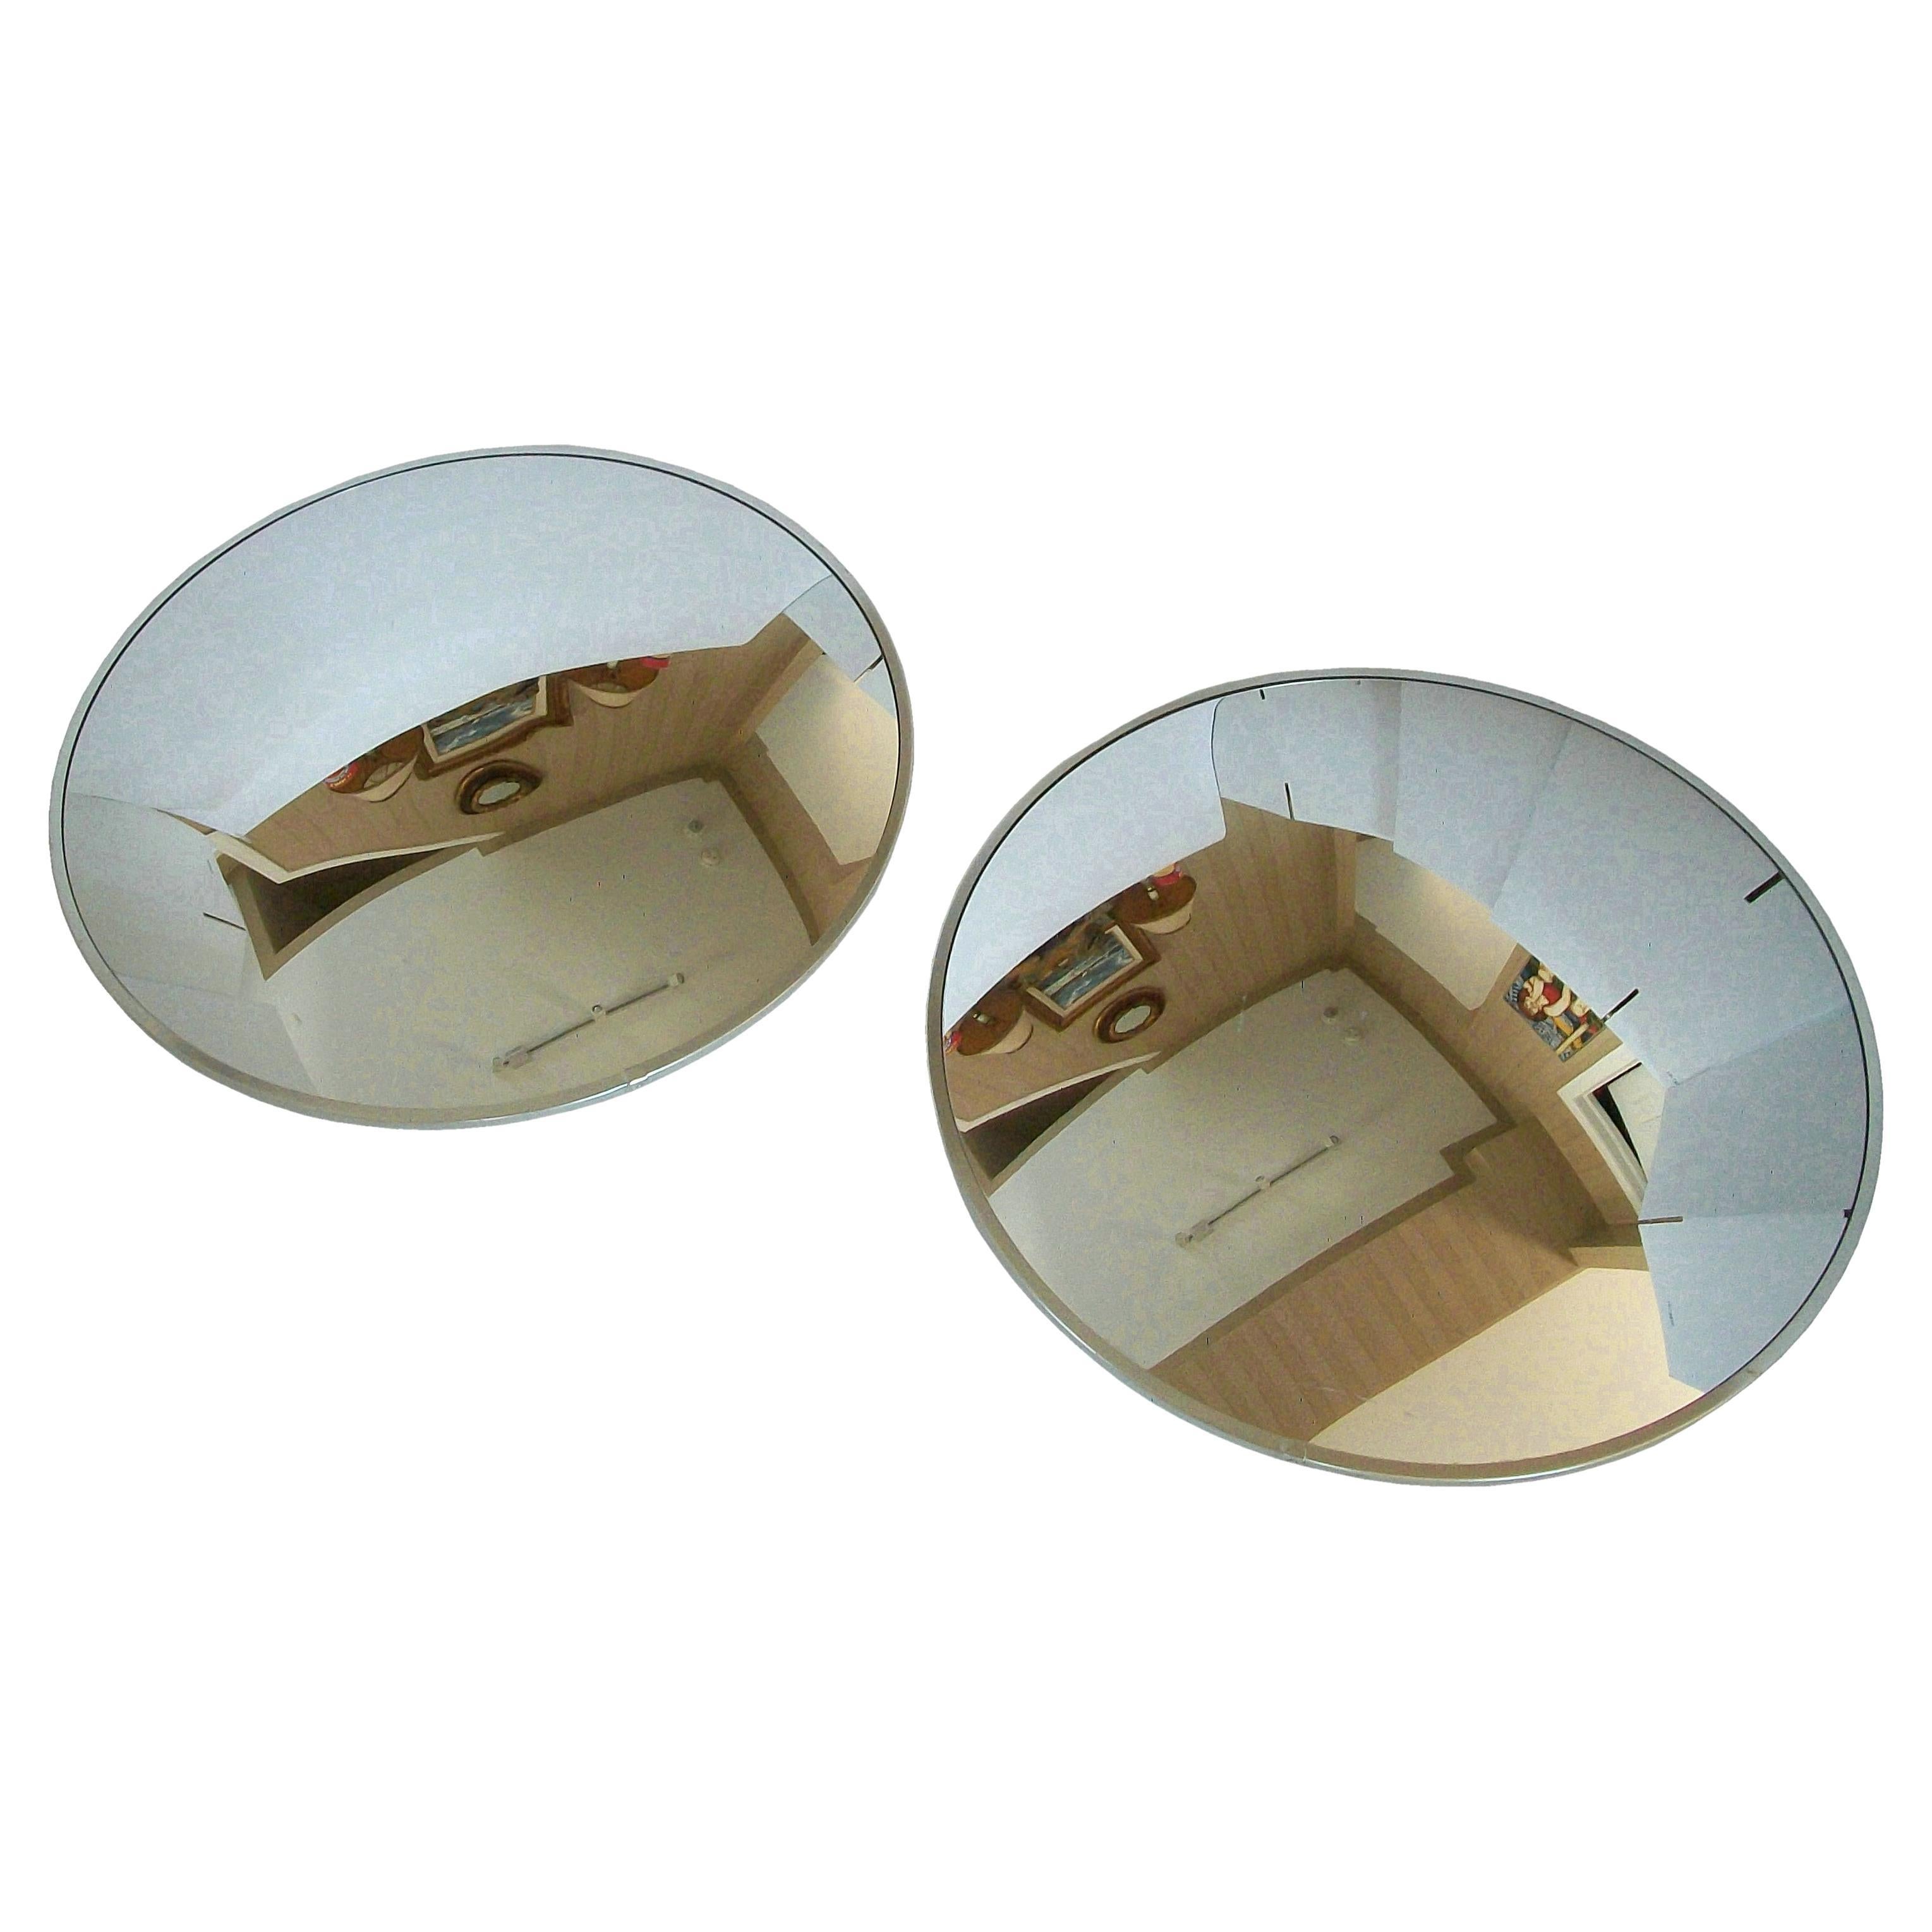 Vintage pair of industrial convex mirrors - aluminum metal trim - Masonite back panels - unsigned - United States - late 20th century.

Excellent vintage condition - scuffs and scratches to the mirror glass on both pieces - signs of age and